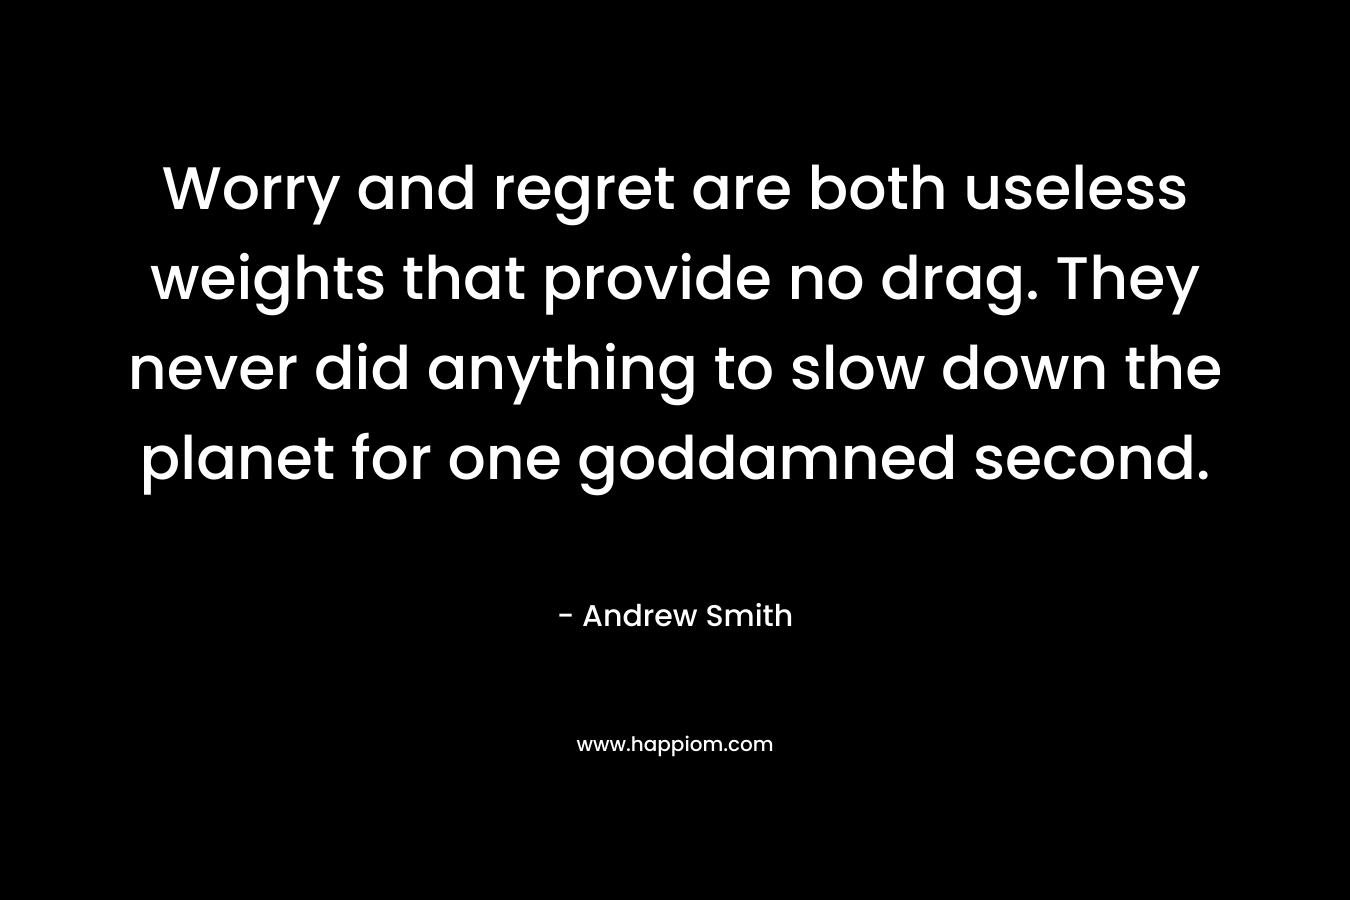 Worry and regret are both useless weights that provide no drag. They never did anything to slow down the planet for one goddamned second.